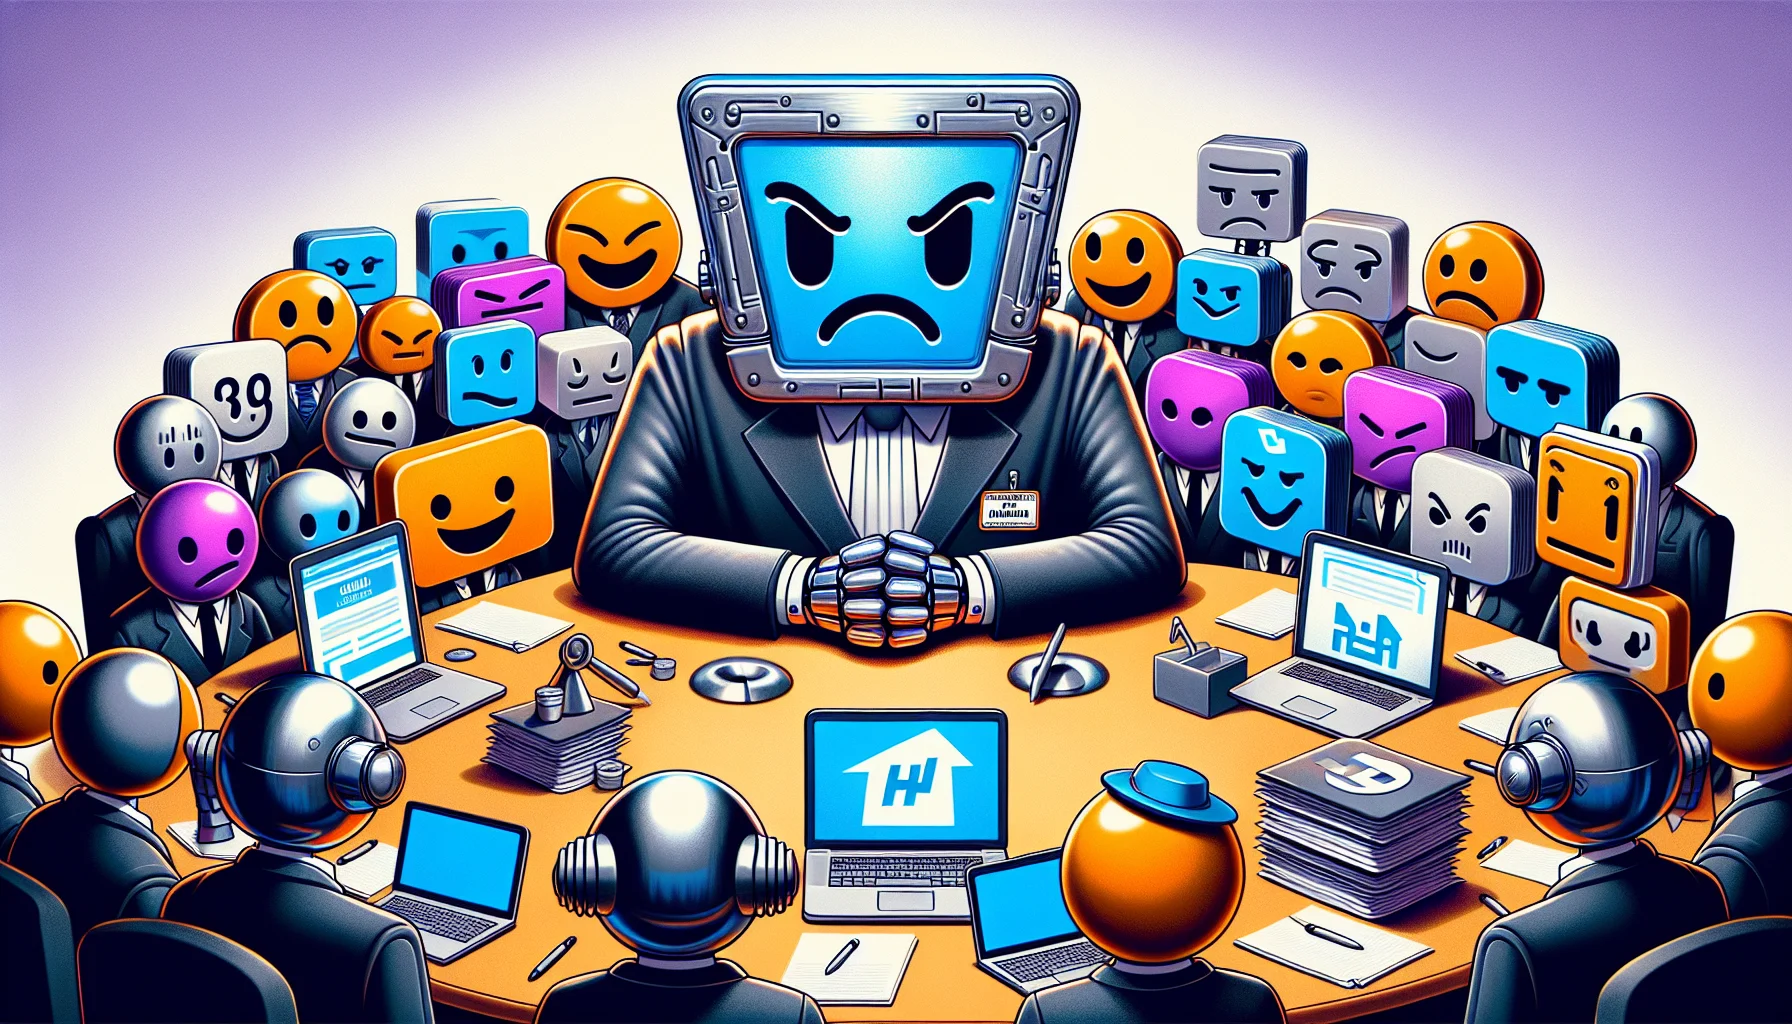 Create an image depicting a humorous scenario about web hosting, where a bunch of cartoonish, anthropomorphic website symbols are having a meeting. In the center, there's a stern, lawyer-like figure made of futuristic metal and glass, representing the concept of 'HIPAA Compliance'. Around it, website symbols of different shapes and sizes (representing various hosting platforms) are in awe: some are chuckling nervously, others are taking notes eagerly, trying to follow the standards of HIPAA Compliance. Every figure is incredibly rich in color, creating a vivid, enticing atmosphere.